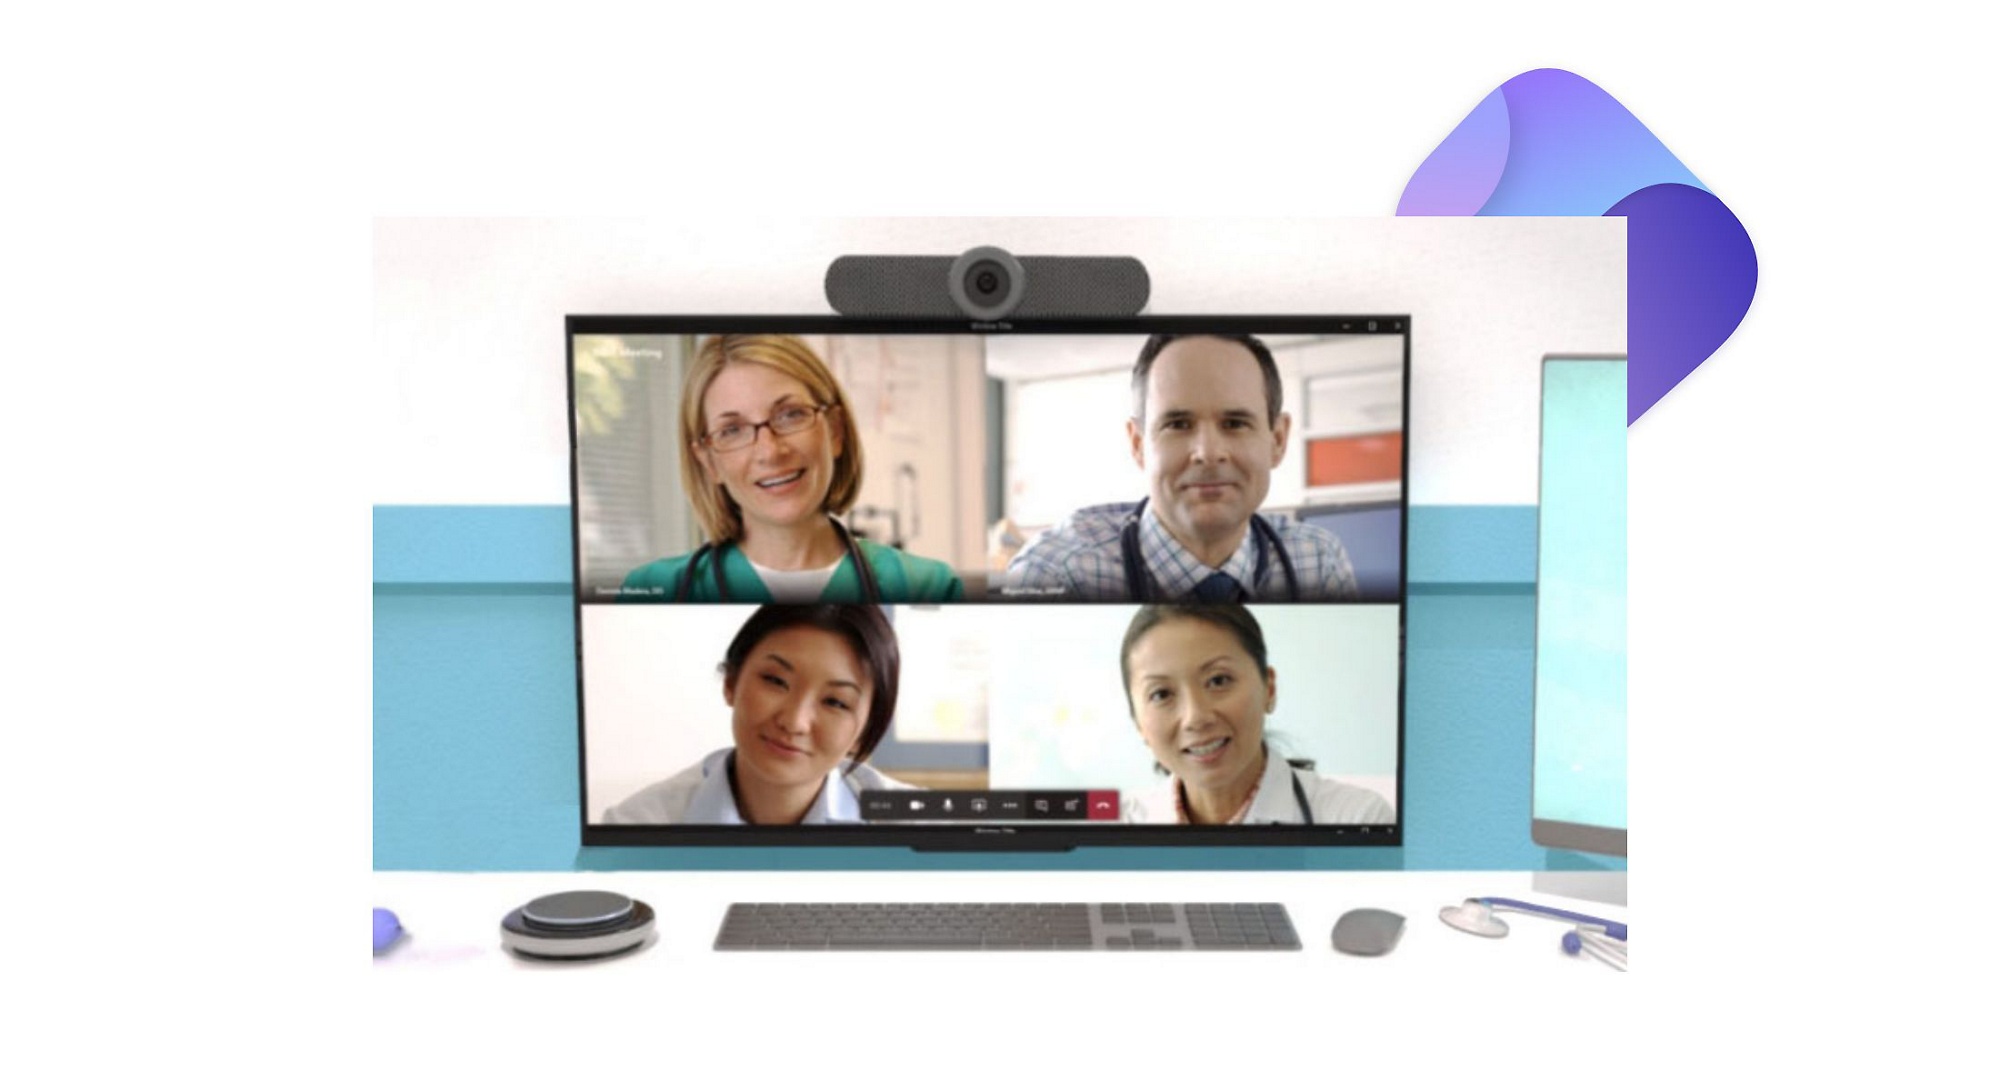 A Teams video call in progress at a desk with a monitor, camera and intelligent speaker.